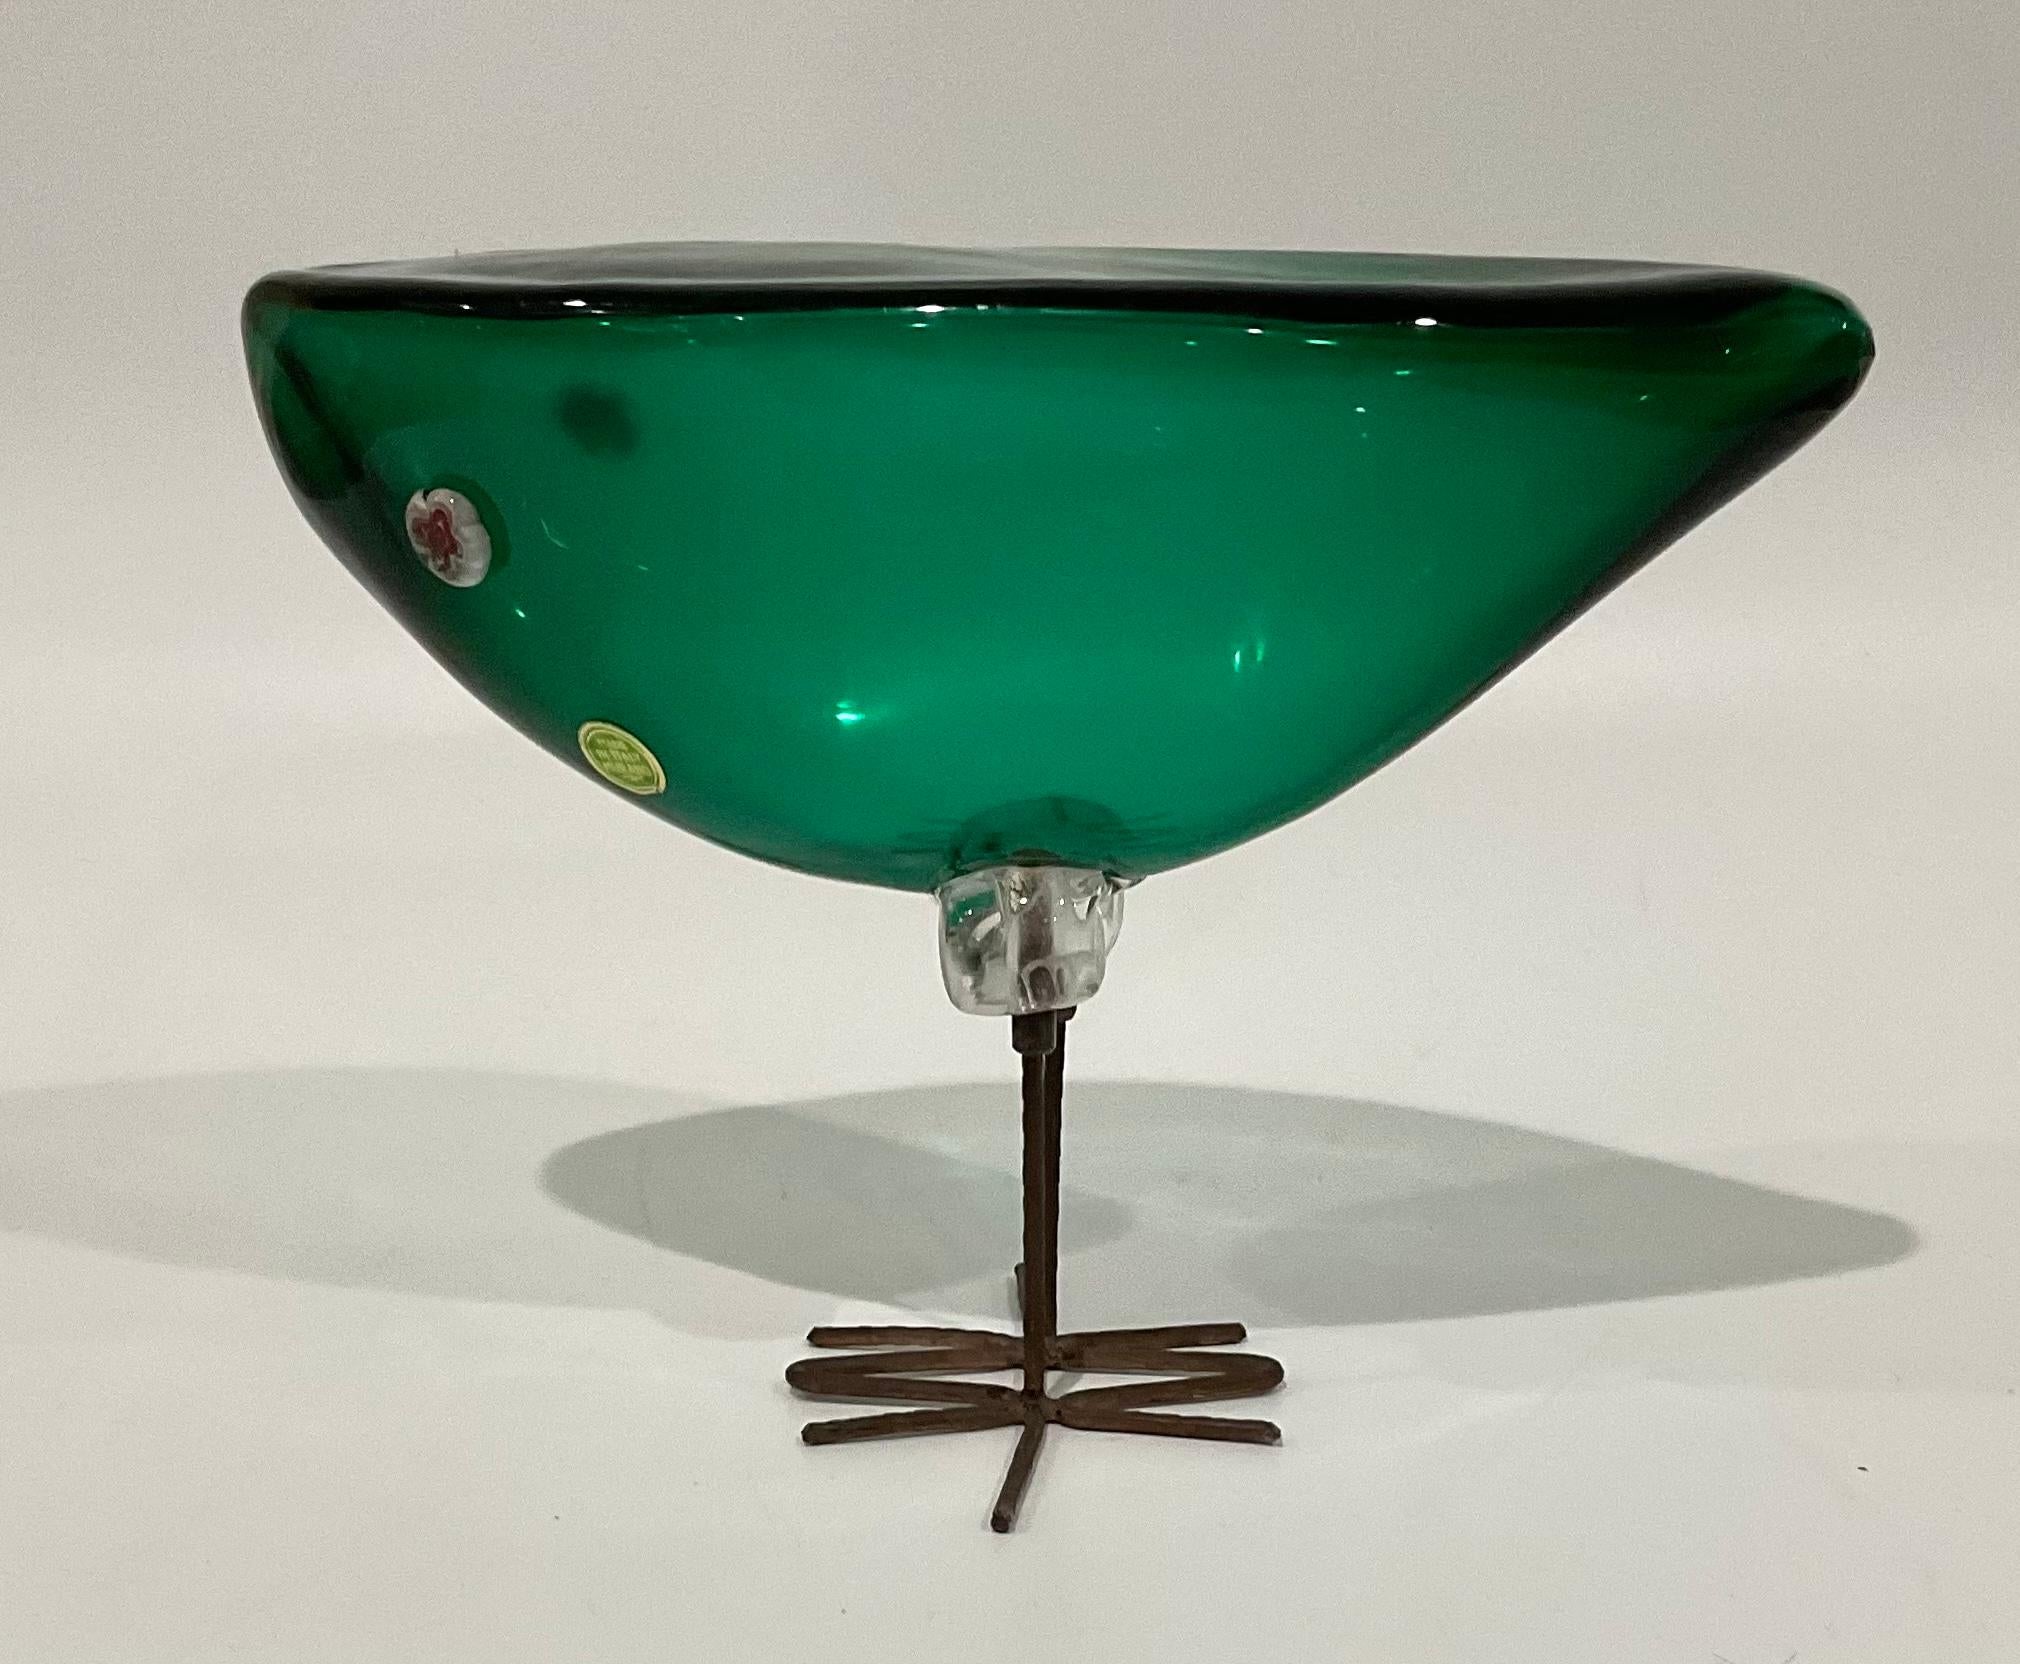 Rare Murano glass bird designed by Alessandro Pianon for Vistosi circa 1960’s. This color is seldom seen, and this form is one of the hardest to find. Will enhance any Murano collection, or any mid century modern interior. Original copper legs. This